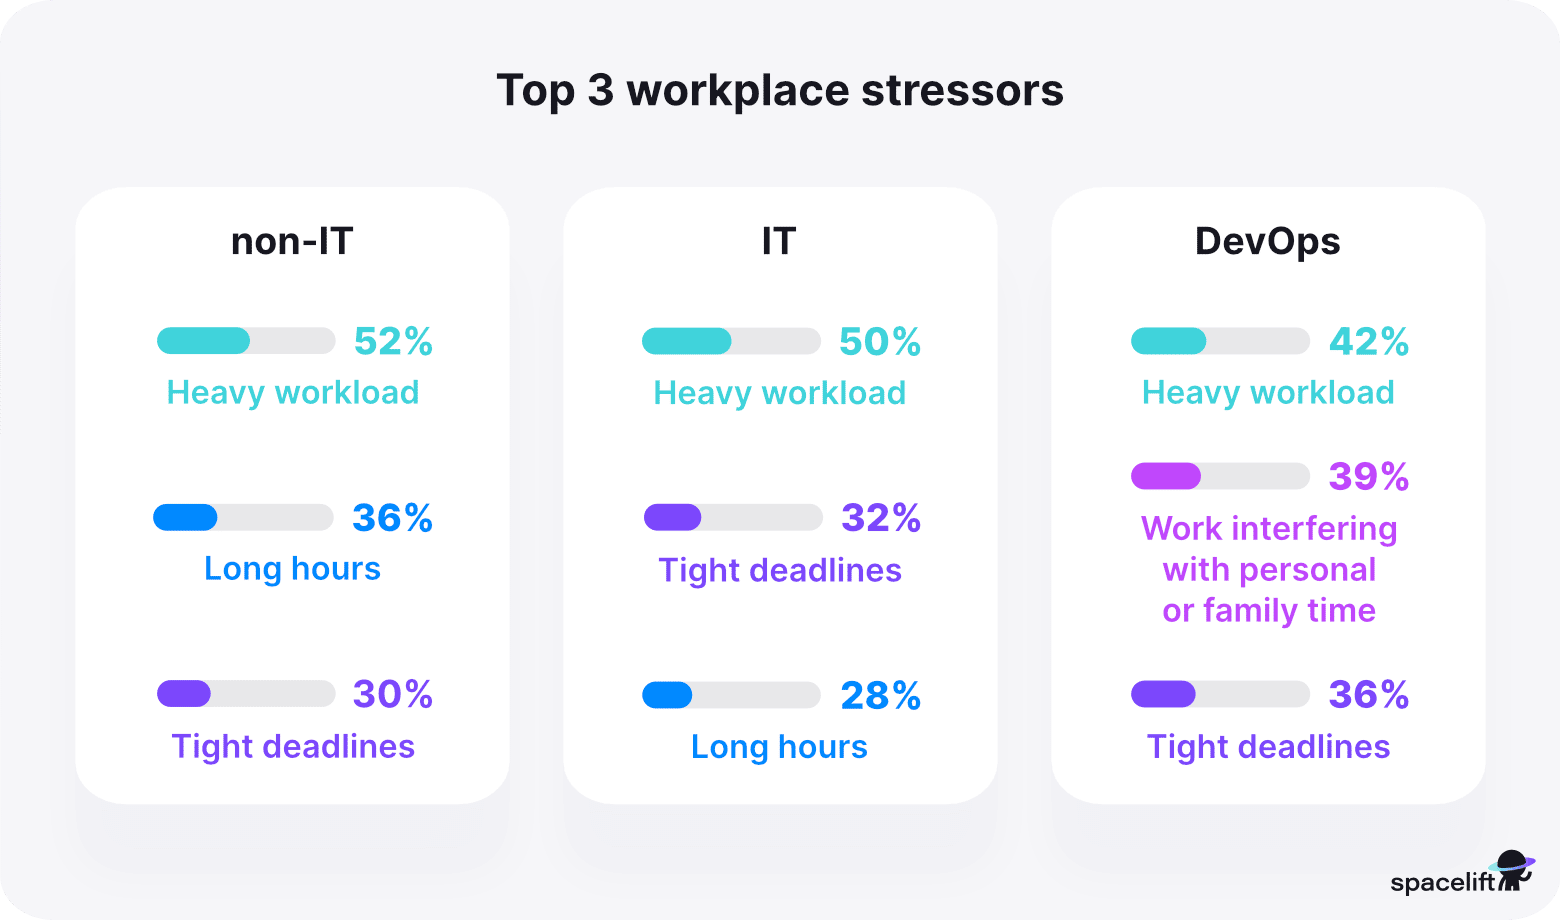 Top workplace stressors - stress in IT report